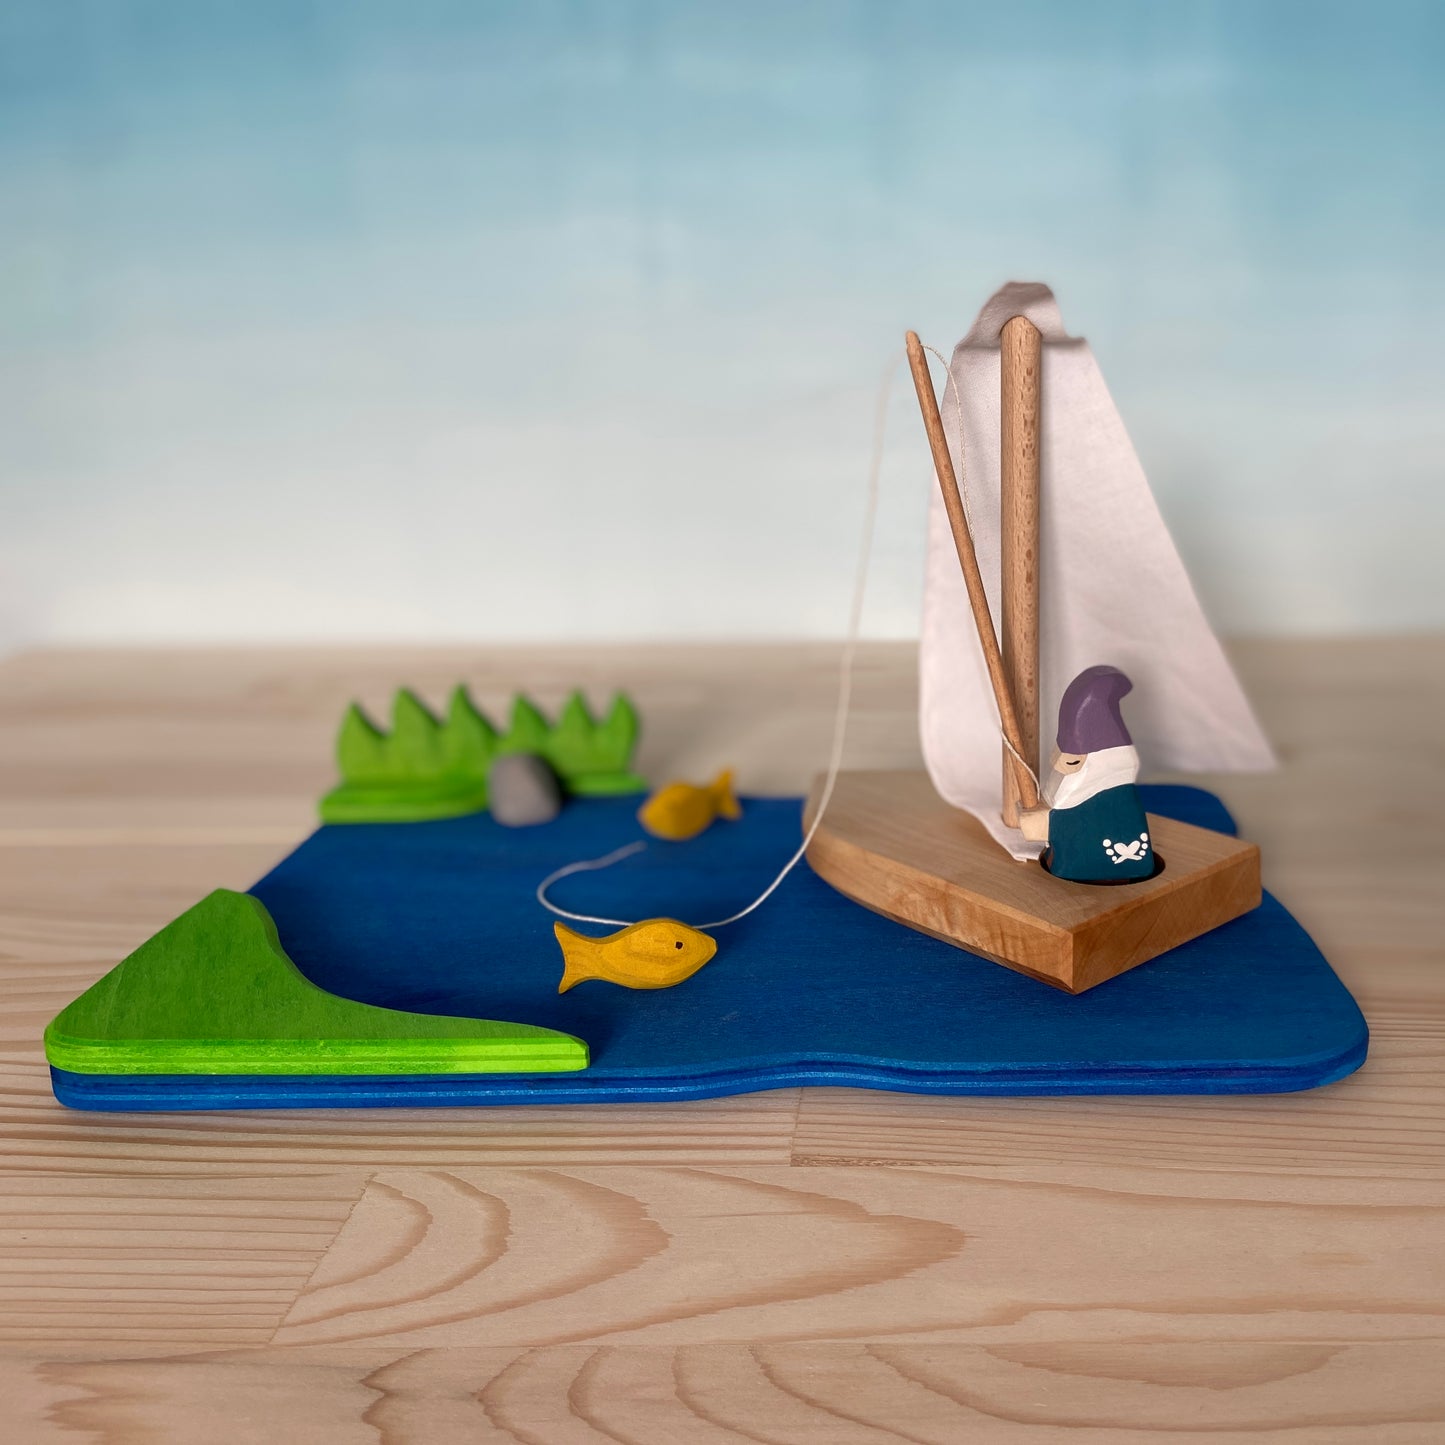 Fisherman & Wooden toy boat  Waldorf toys – Vulp's Wooden Toys